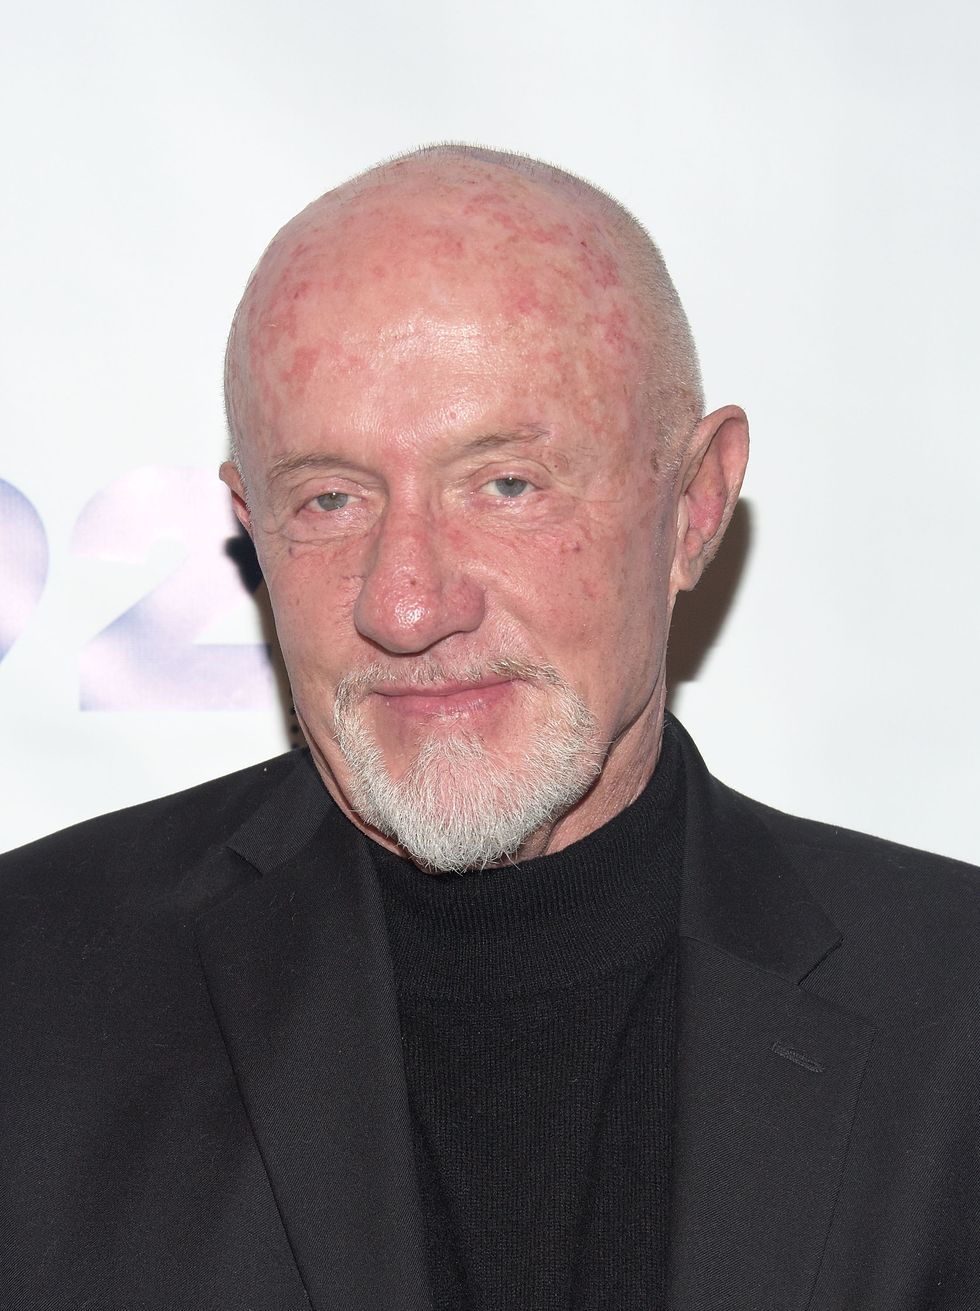 new york, ny   february 05  jonathan banks attends better call saul conversation with cynthia littleton at the 92nd street y on february 5, 2015 in new york city  photo by grant lamos ivgetty images